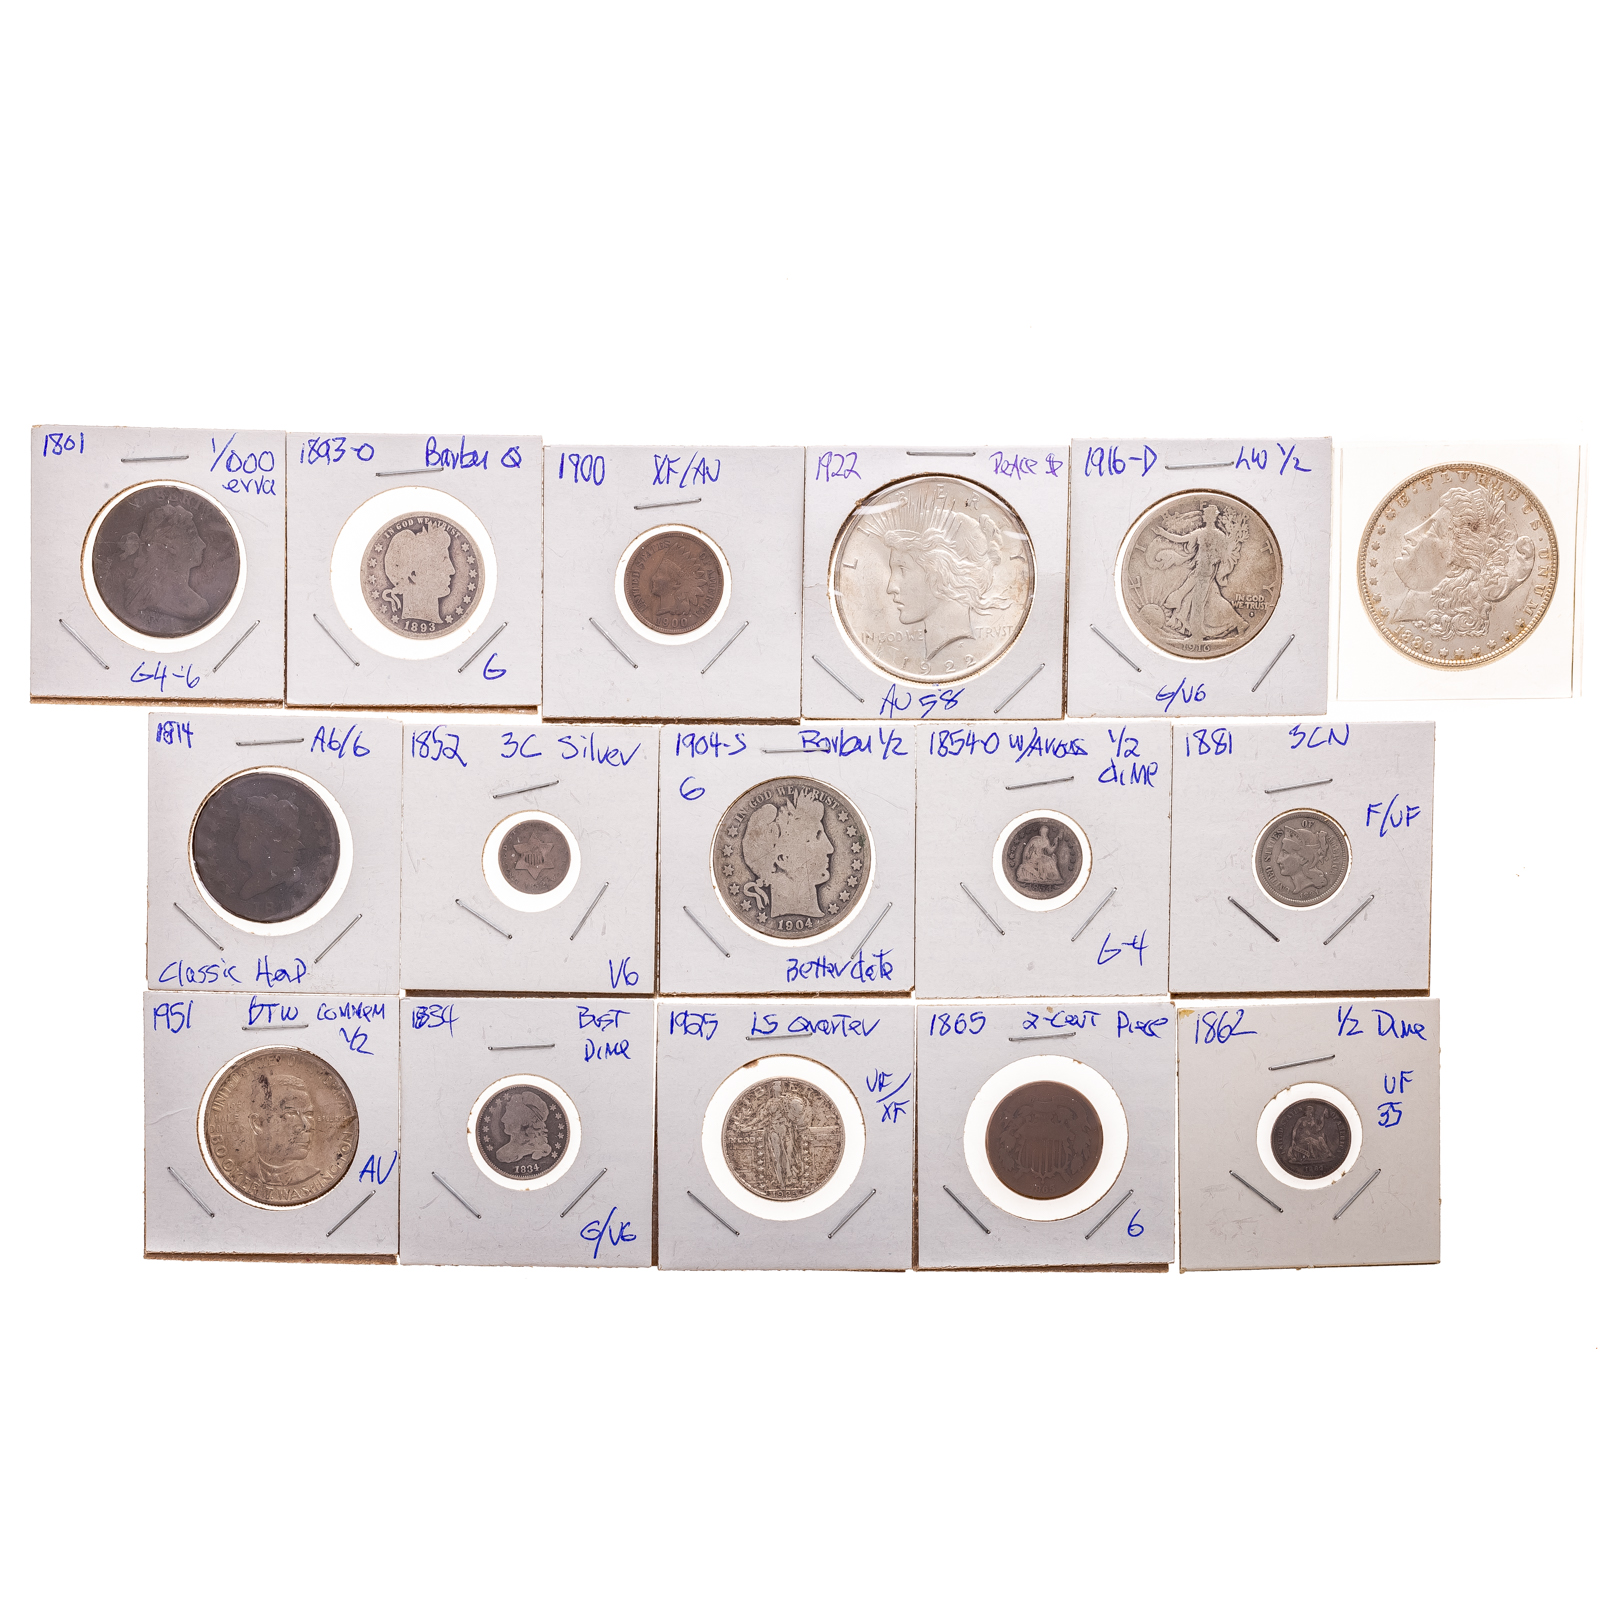 NICE GROUP OF US TYPE COINS 1801 338e2e